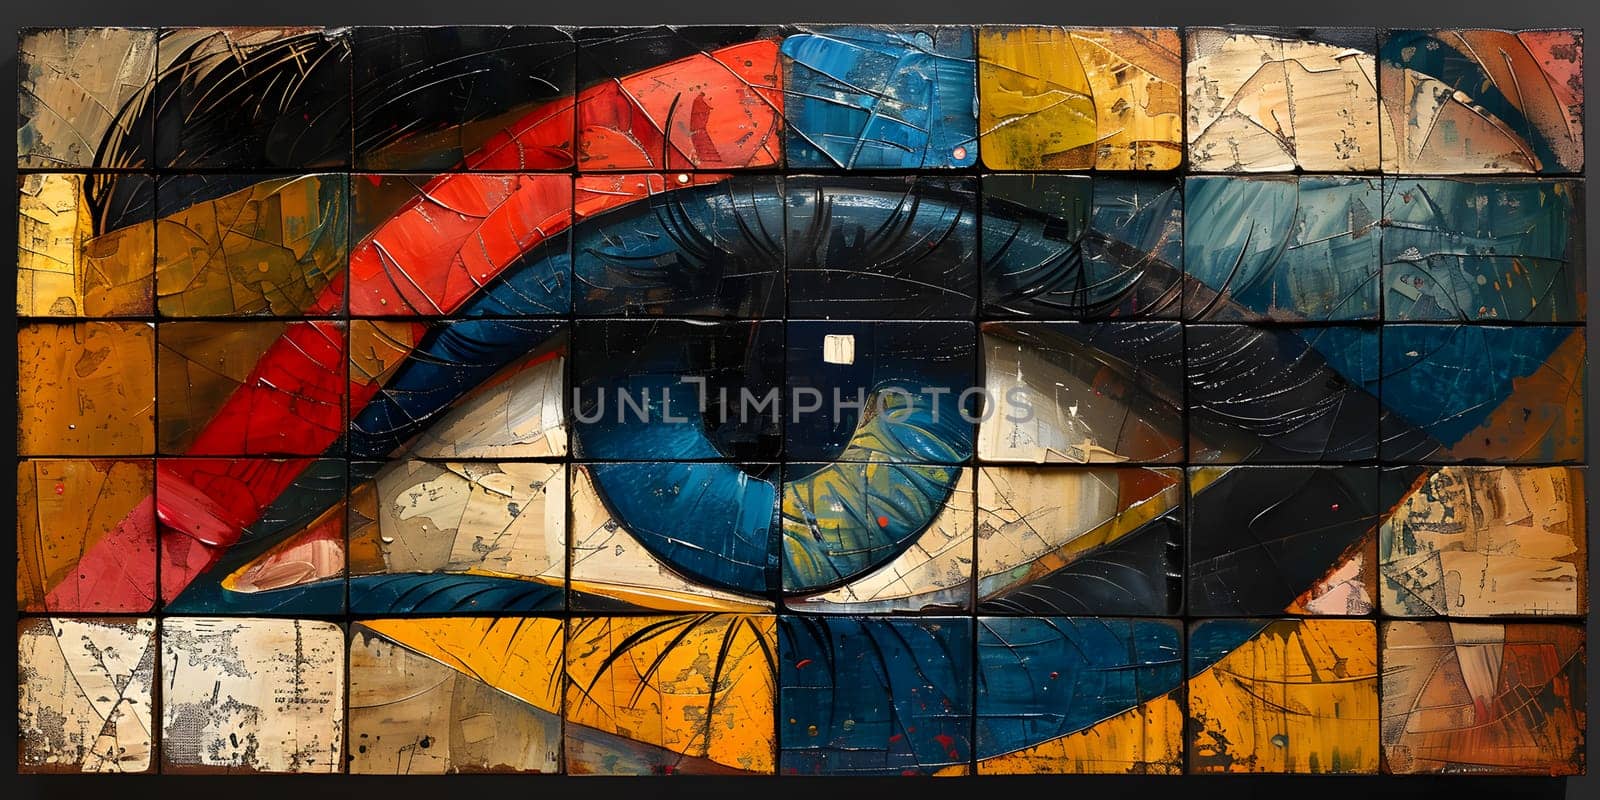 An electric blue circle surrounded by a pattern of glass facades, resembling a colorful painting of a womans eye. A blend of font and visual arts, akin to a logo at an art event